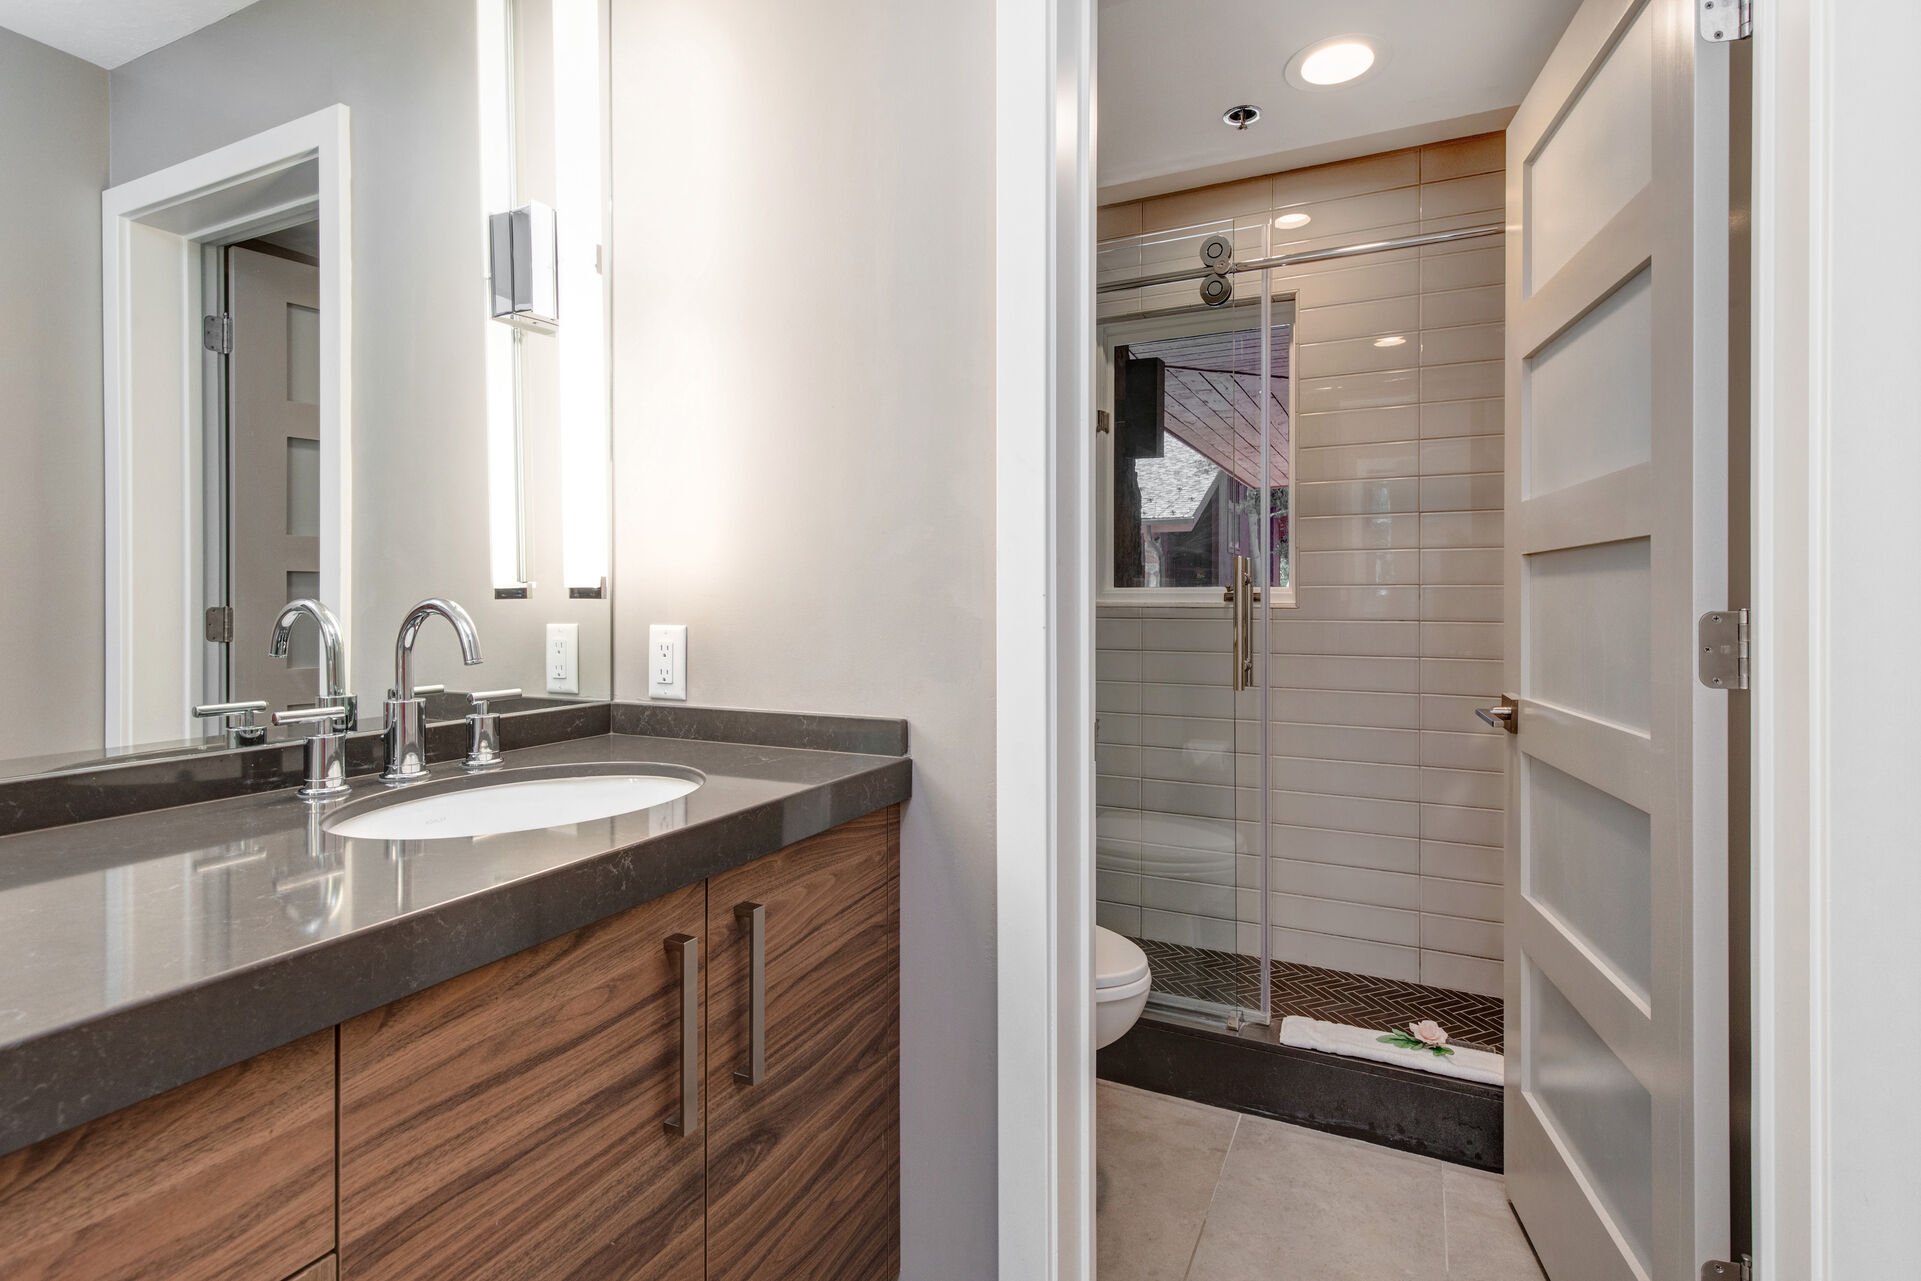 Lower Level Full Shared Bath with Dual Sinks, and Separated Washroom/Shower Area